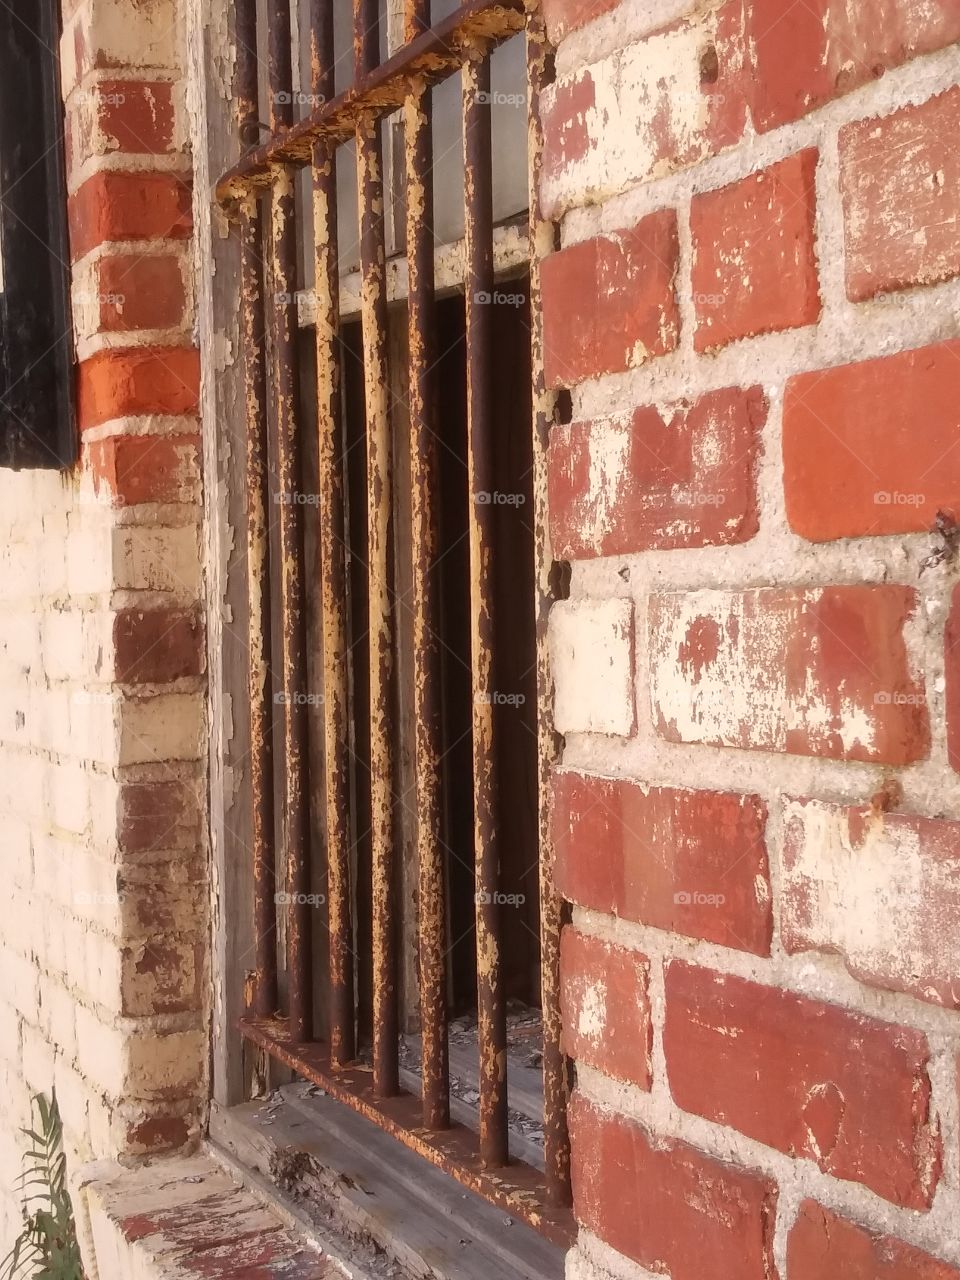 Red Brick Building with Iron Bars in Window